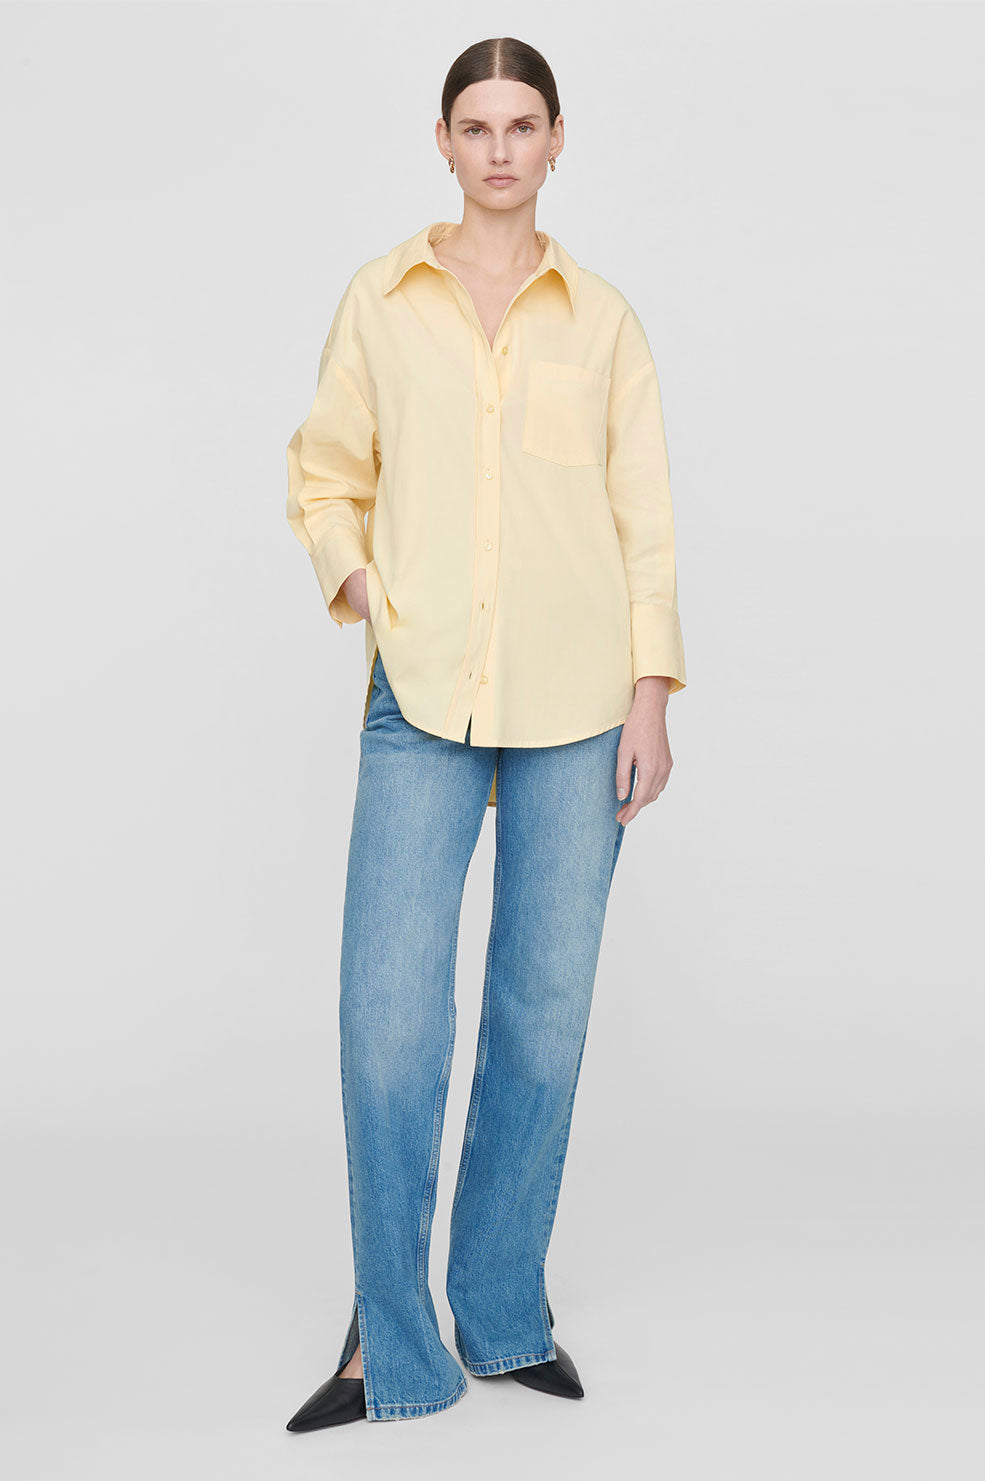 ANINE BING Mika Shirt - Yellow - On Model Front